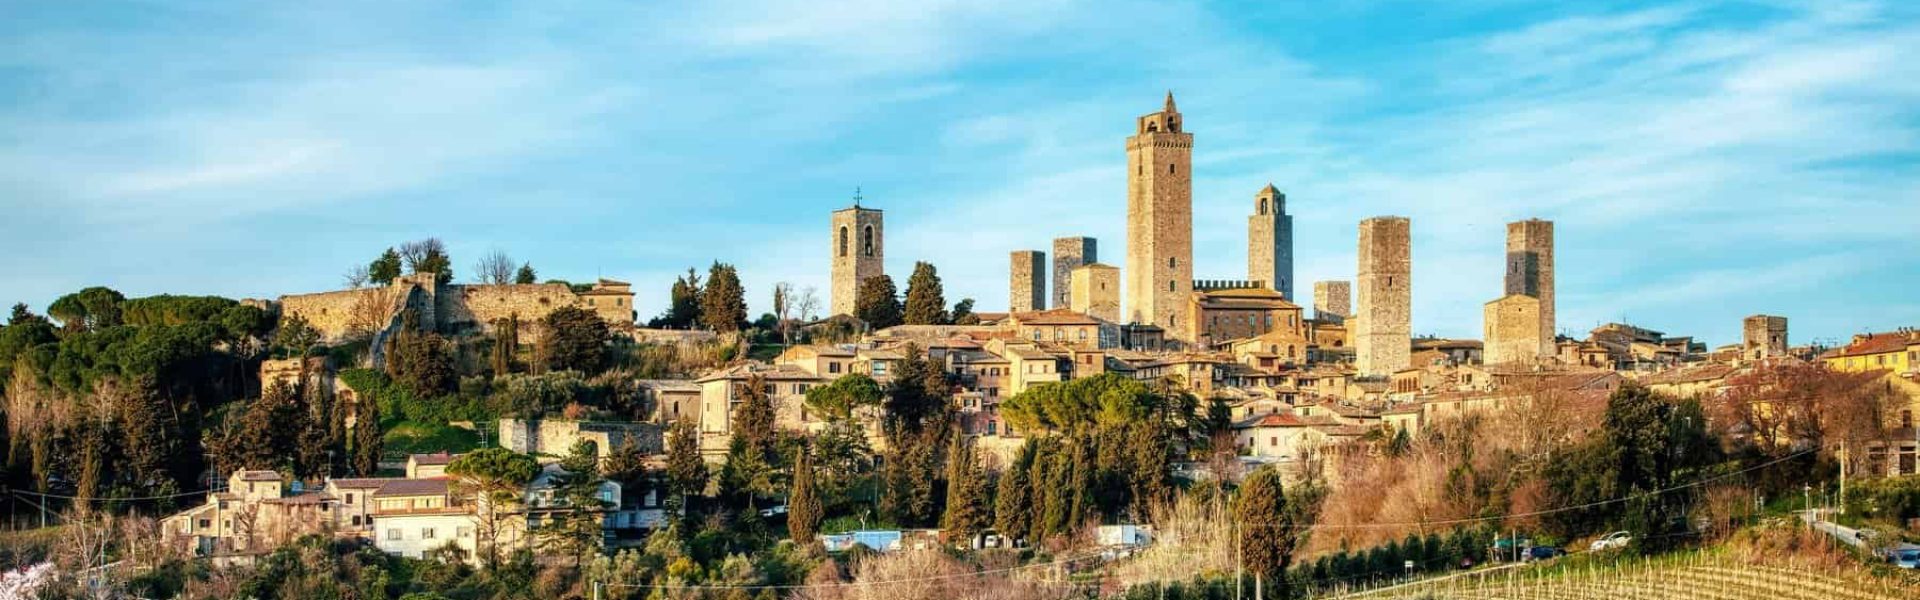 Saint Gimignano. medieval city in Tuscany Italy. Called the Manhattan of the Middle Ages